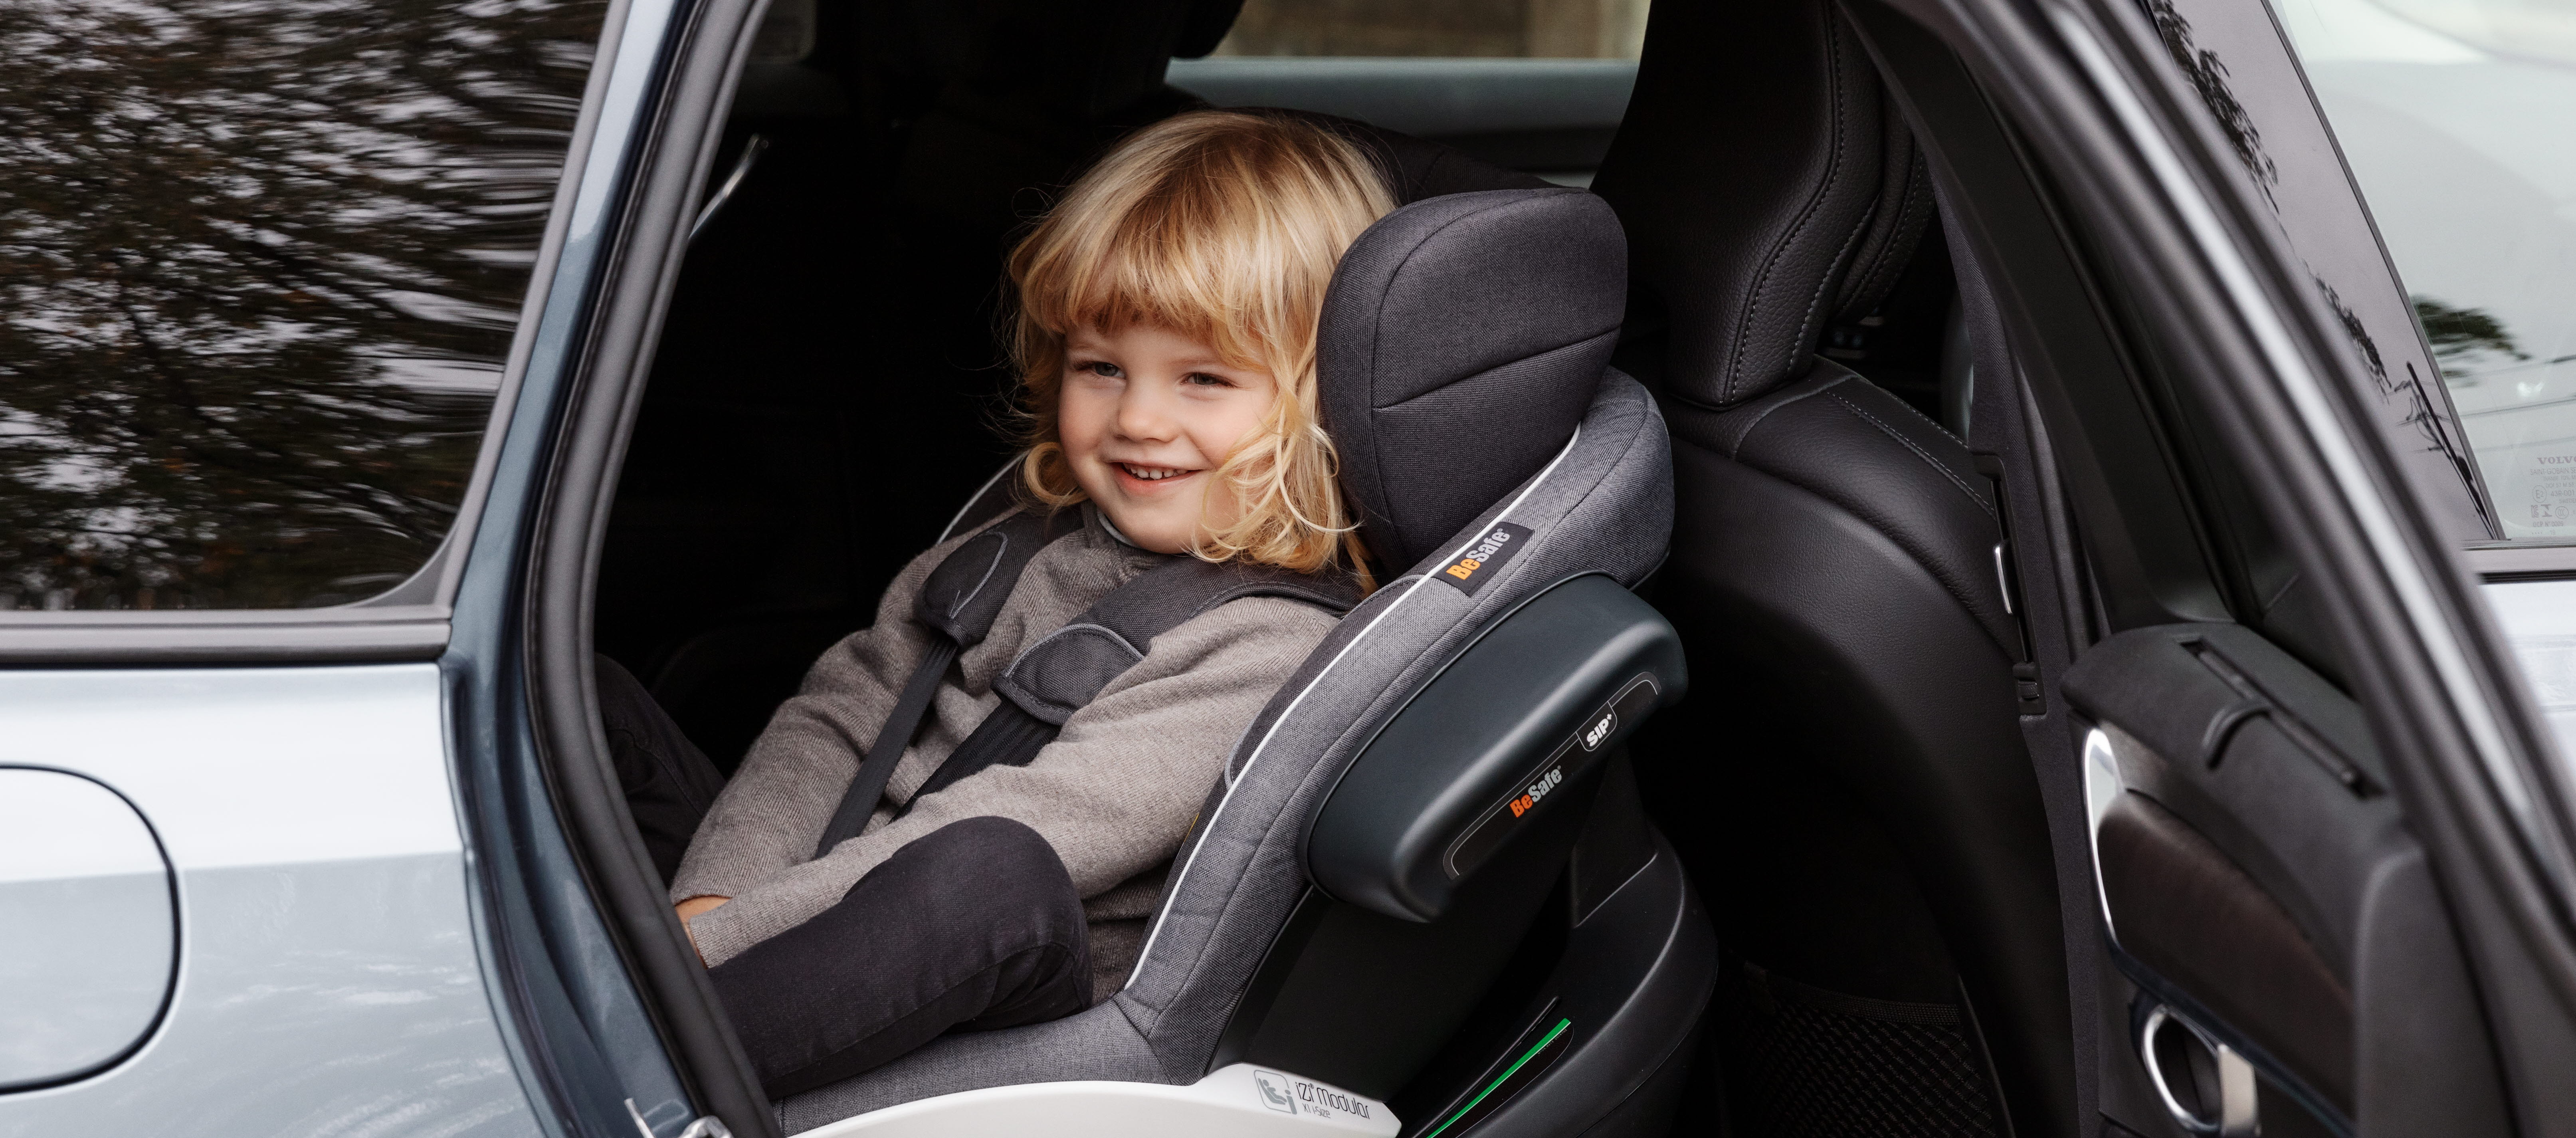 When Can You Move Your Child to a Booster Seat?